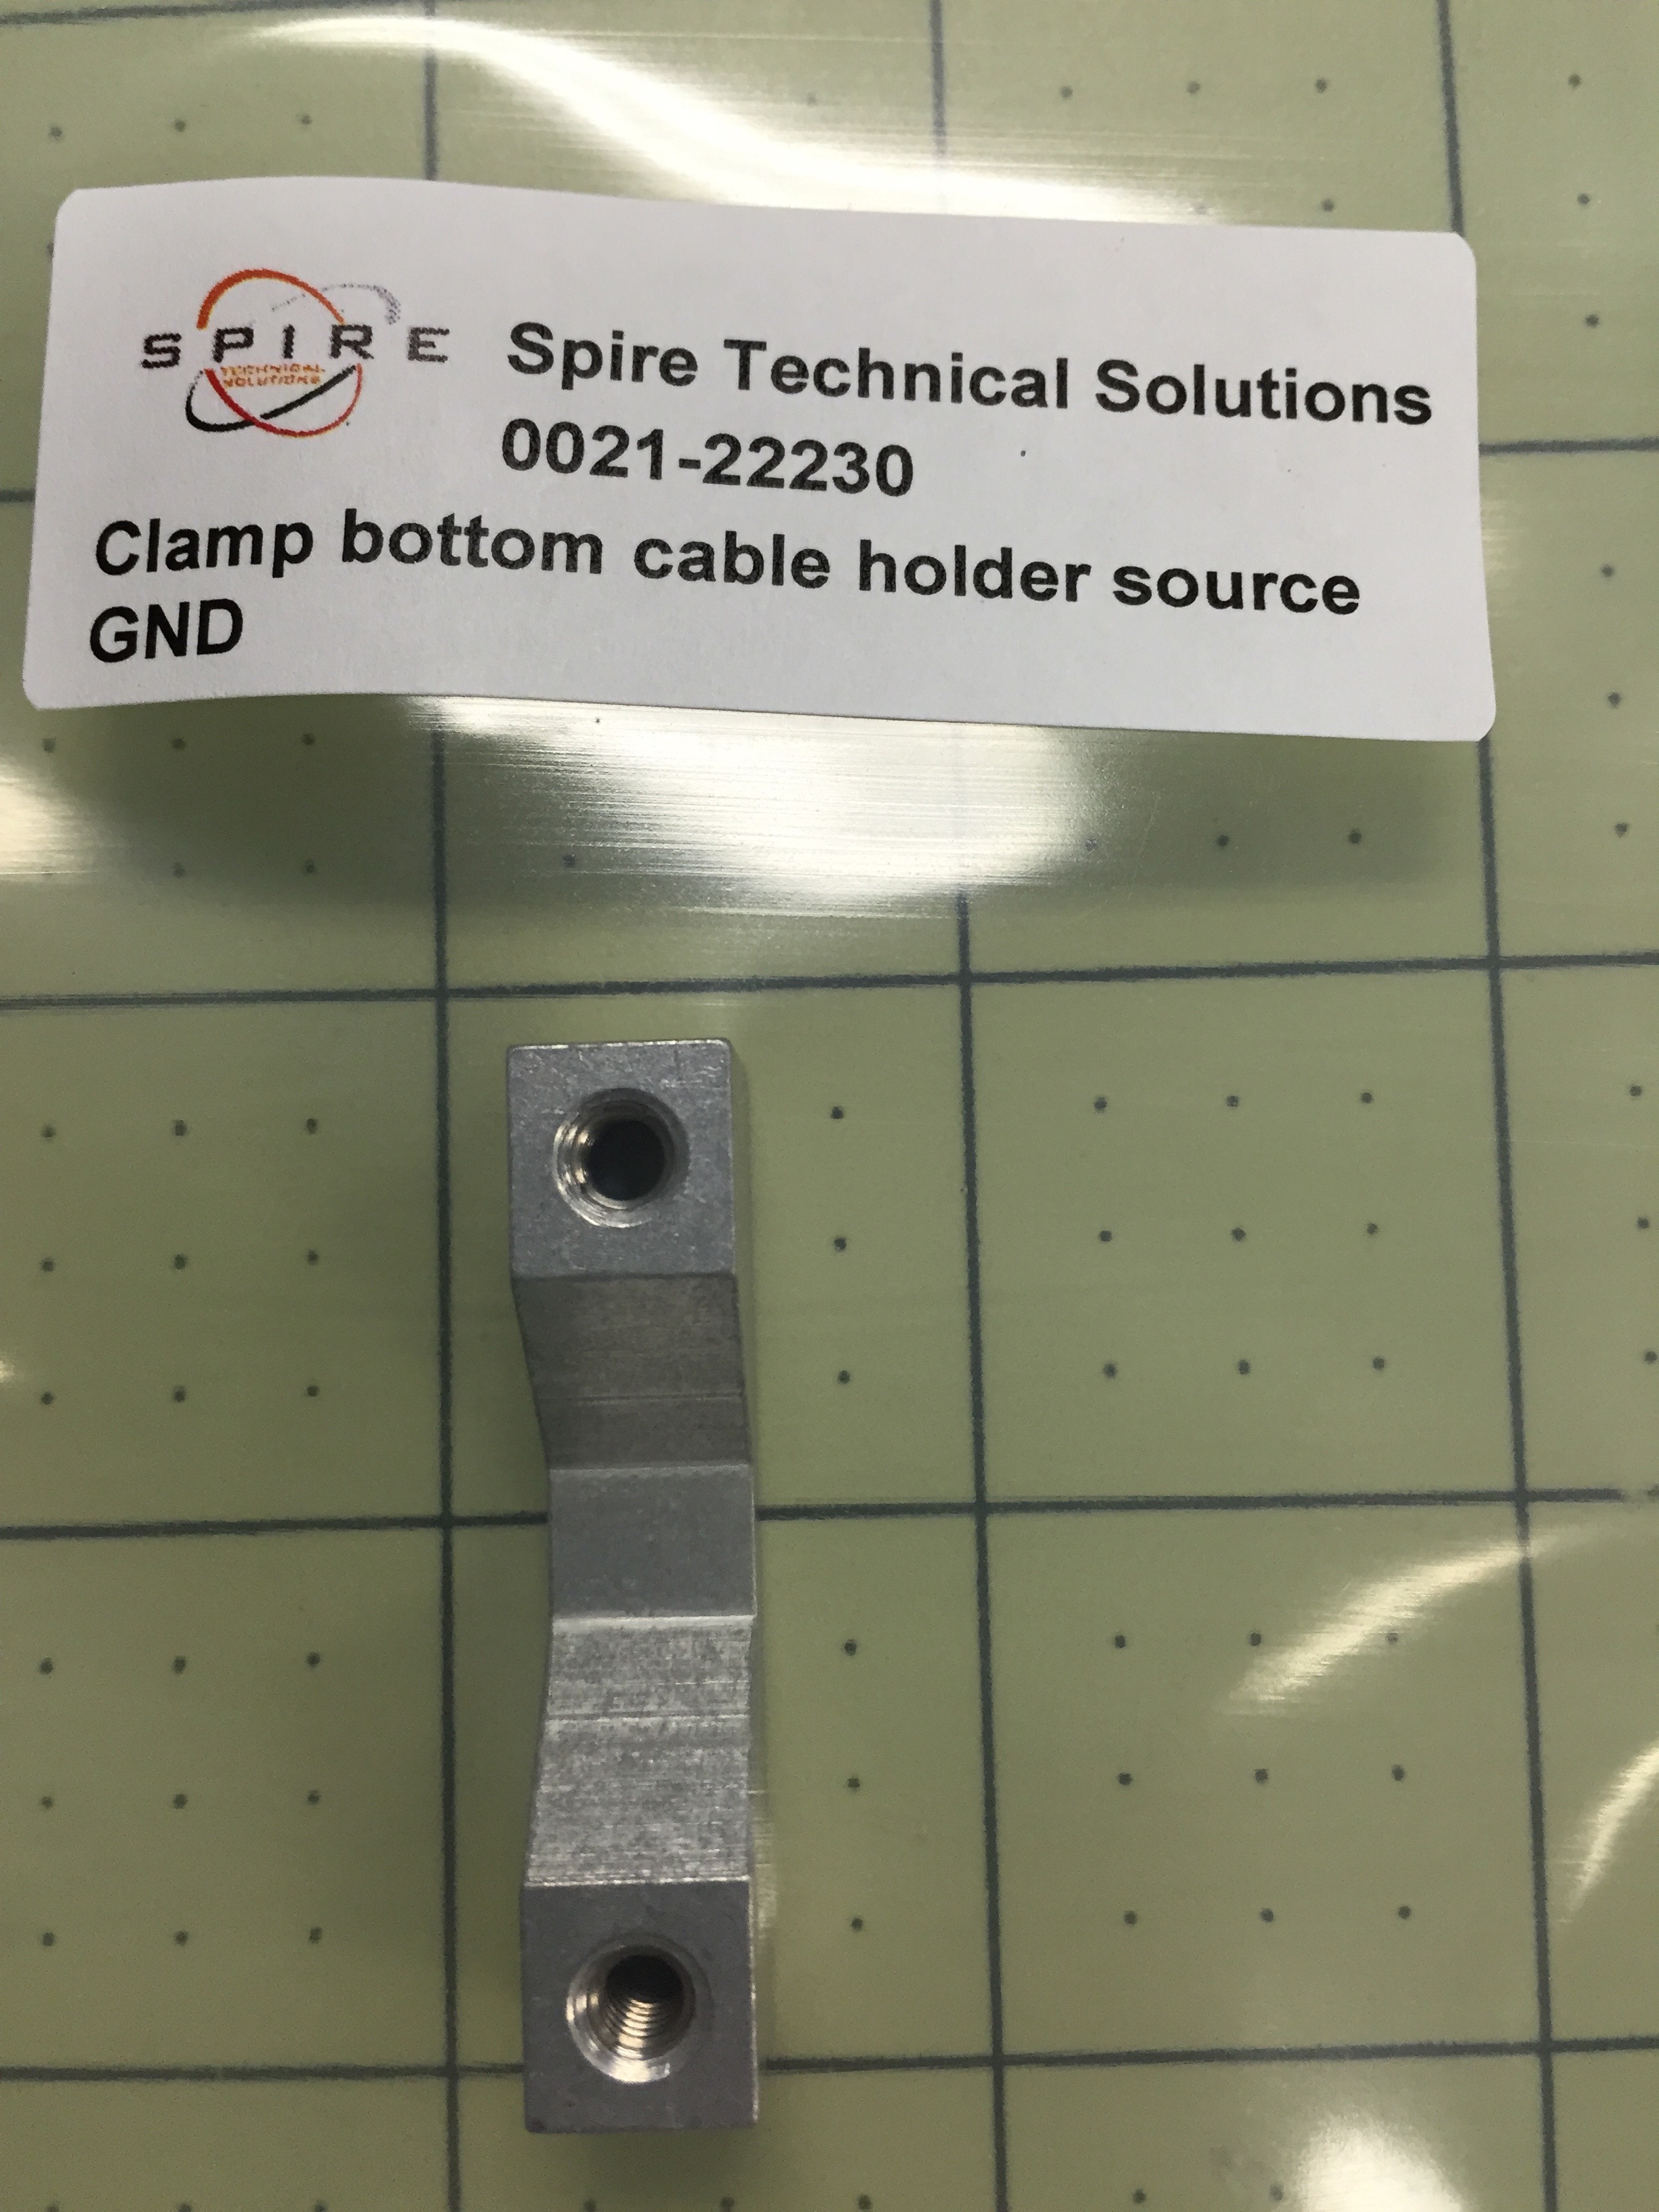 Clamp bottom cable holder source GND